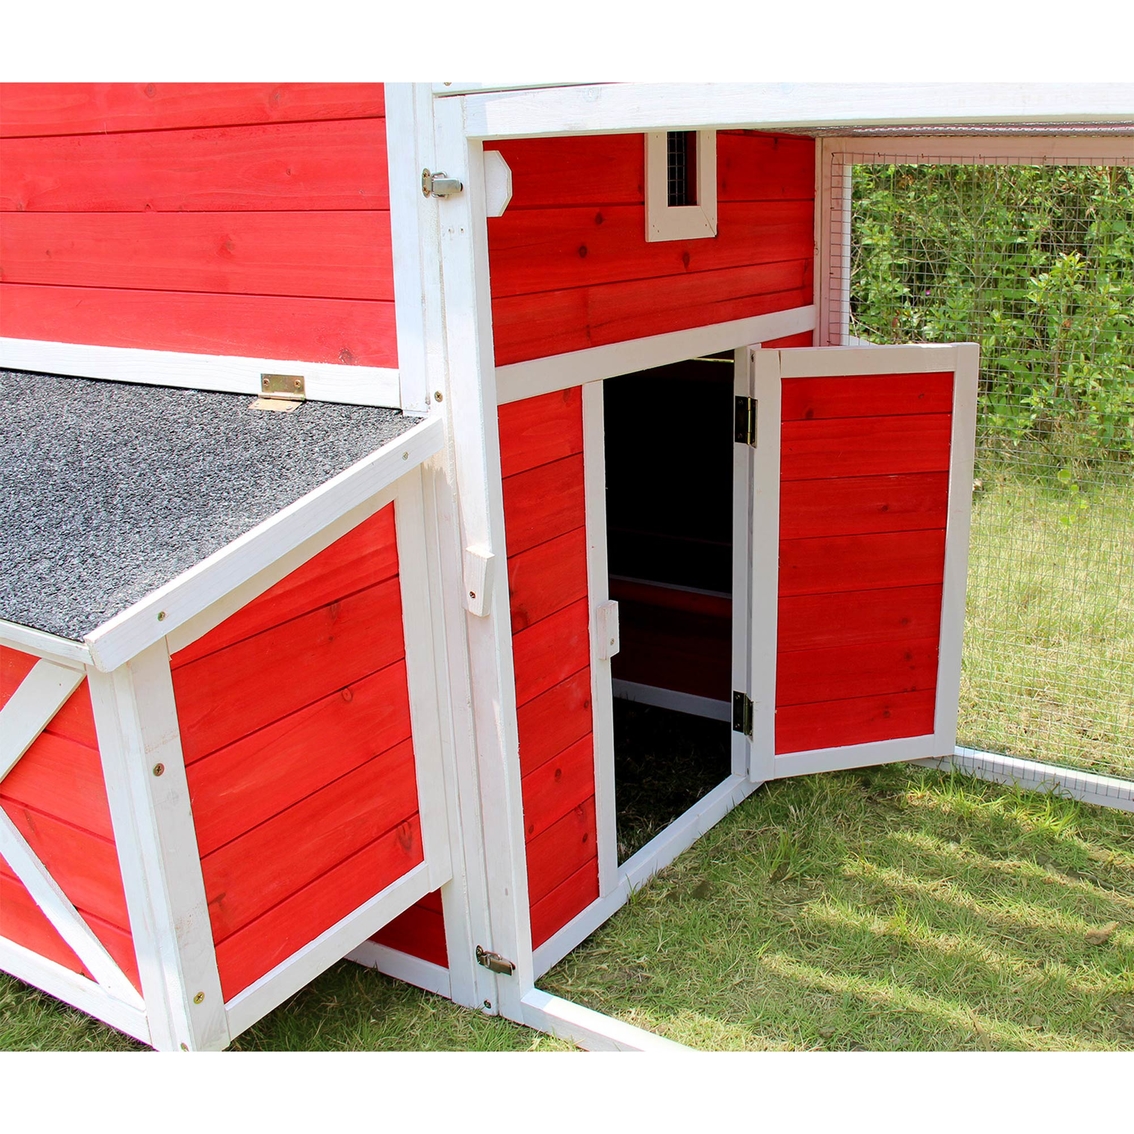 Merry Products Red Barn Chicken Coop - Image 4 of 4